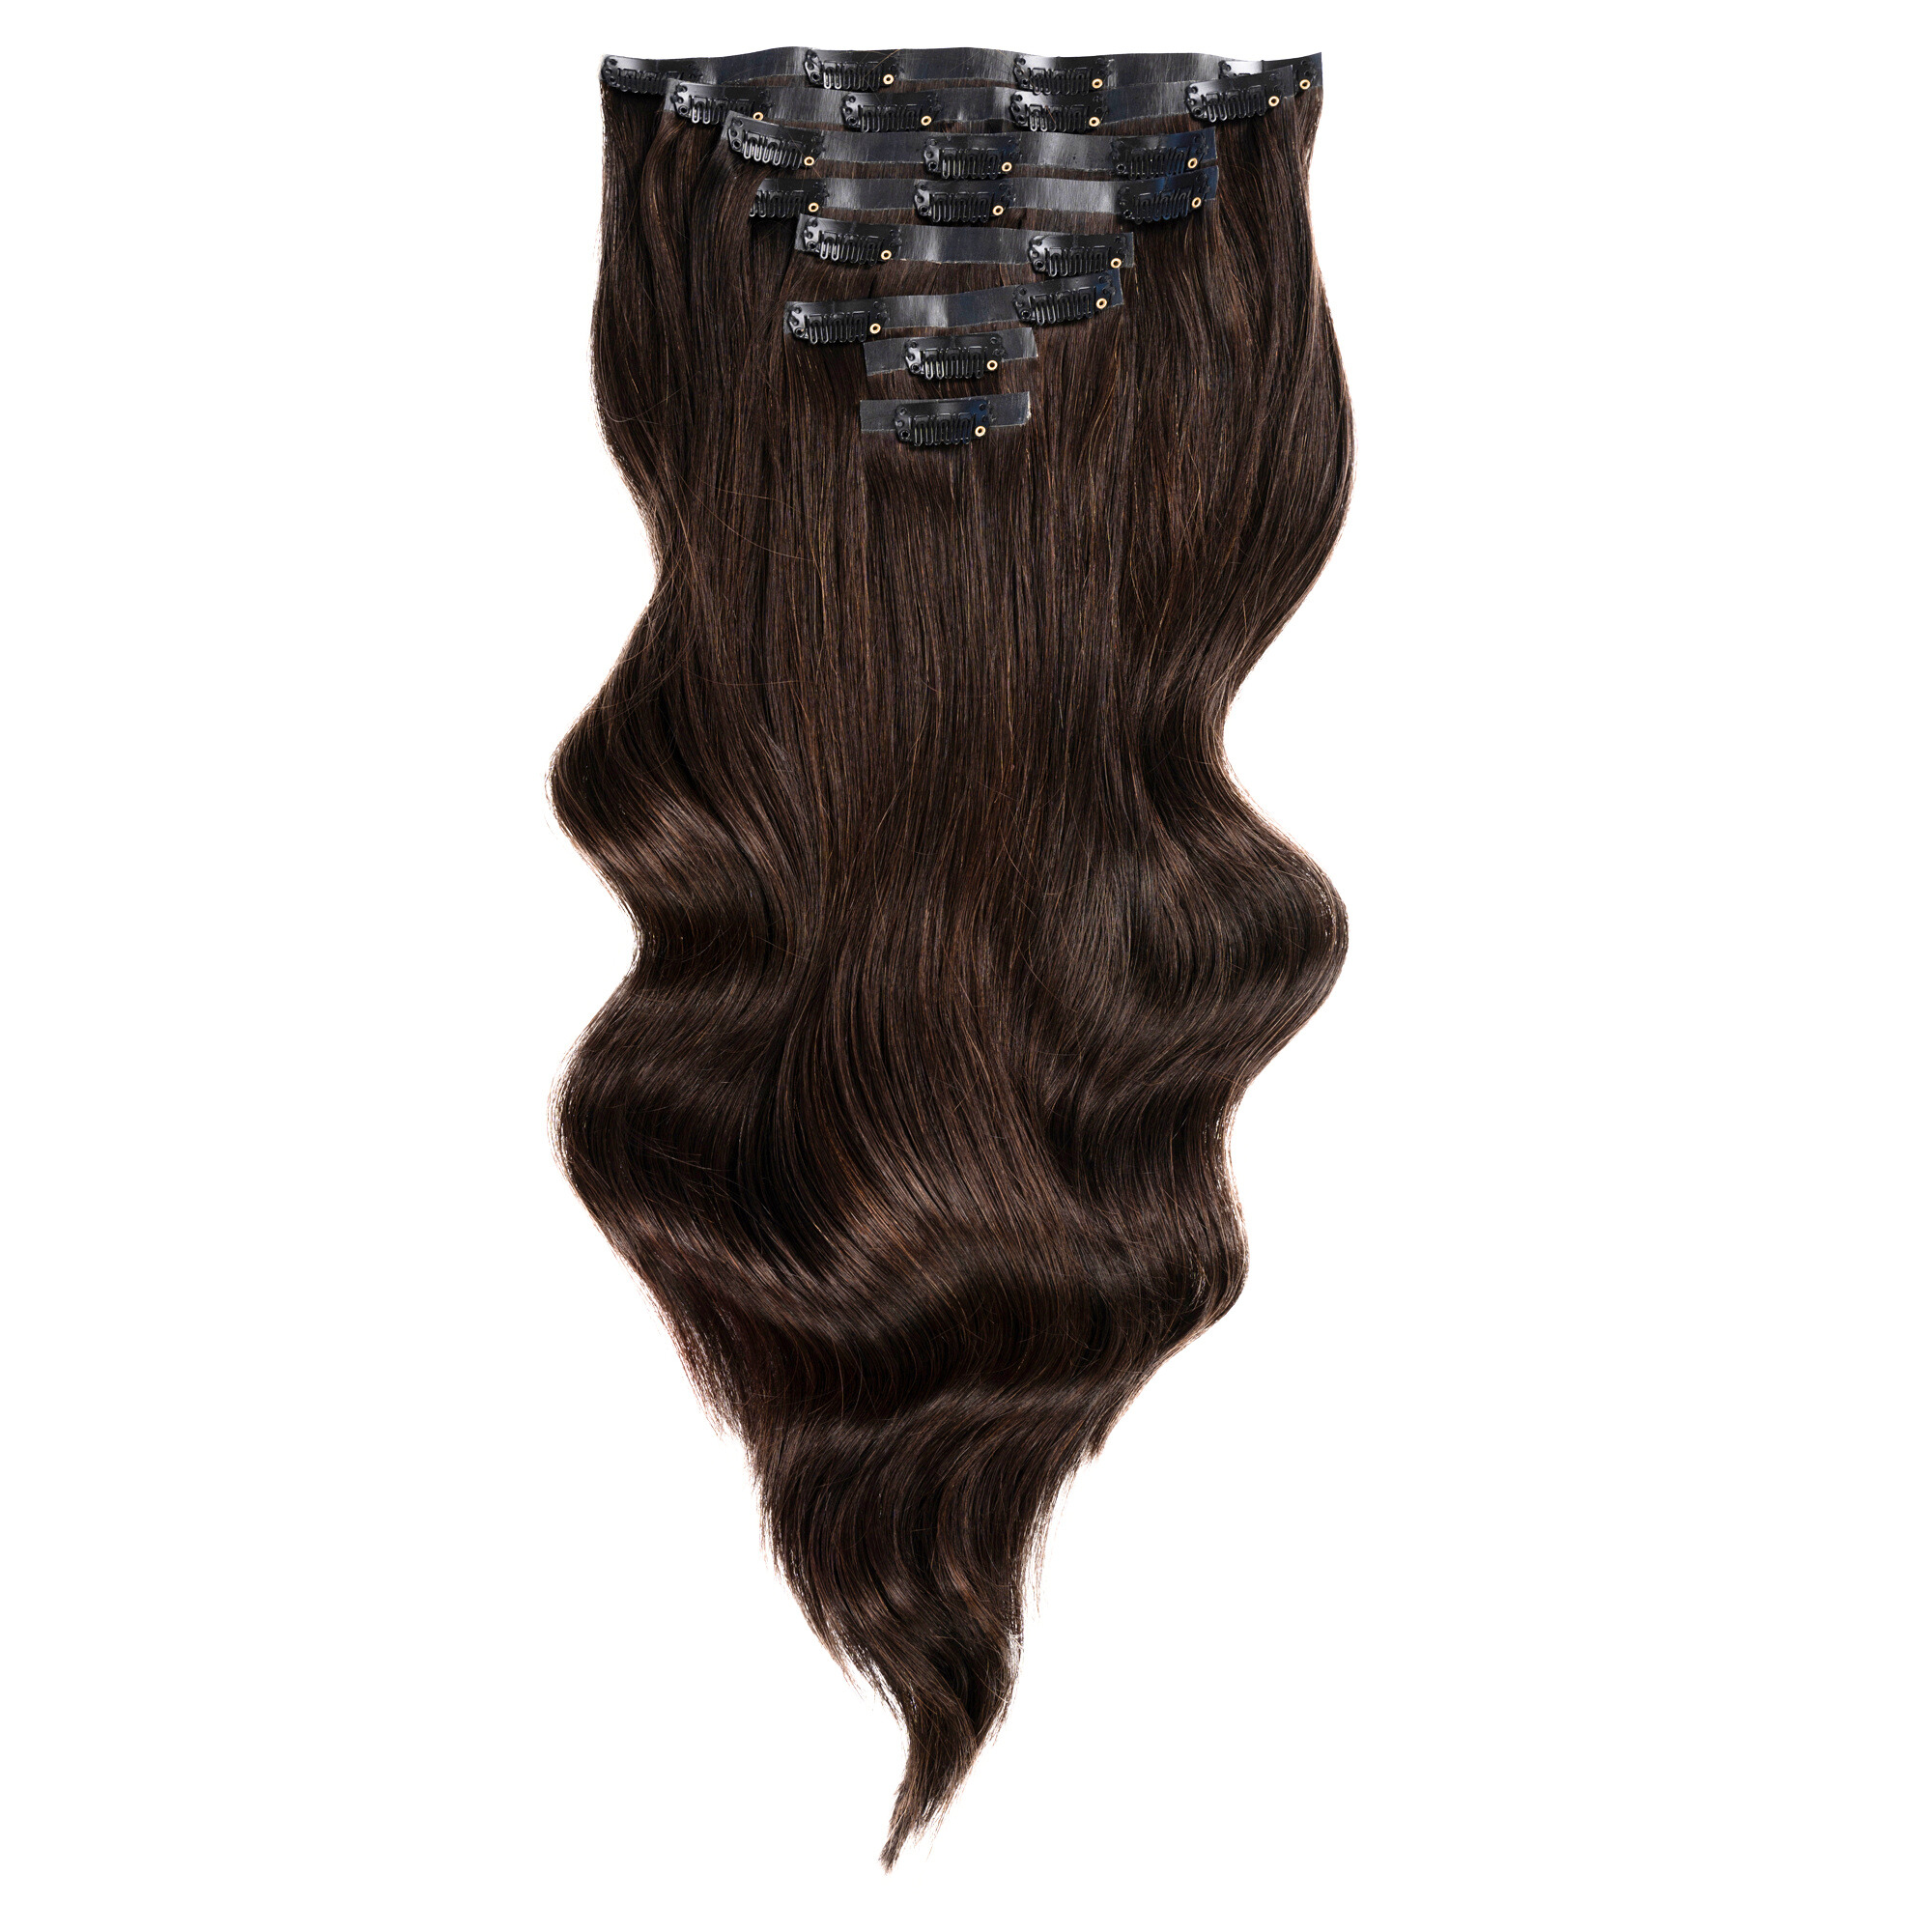 Empress Deluxe Clip In Hair Extensions 20" Colour 1B Brown/Black - Maneology Hair Extensions